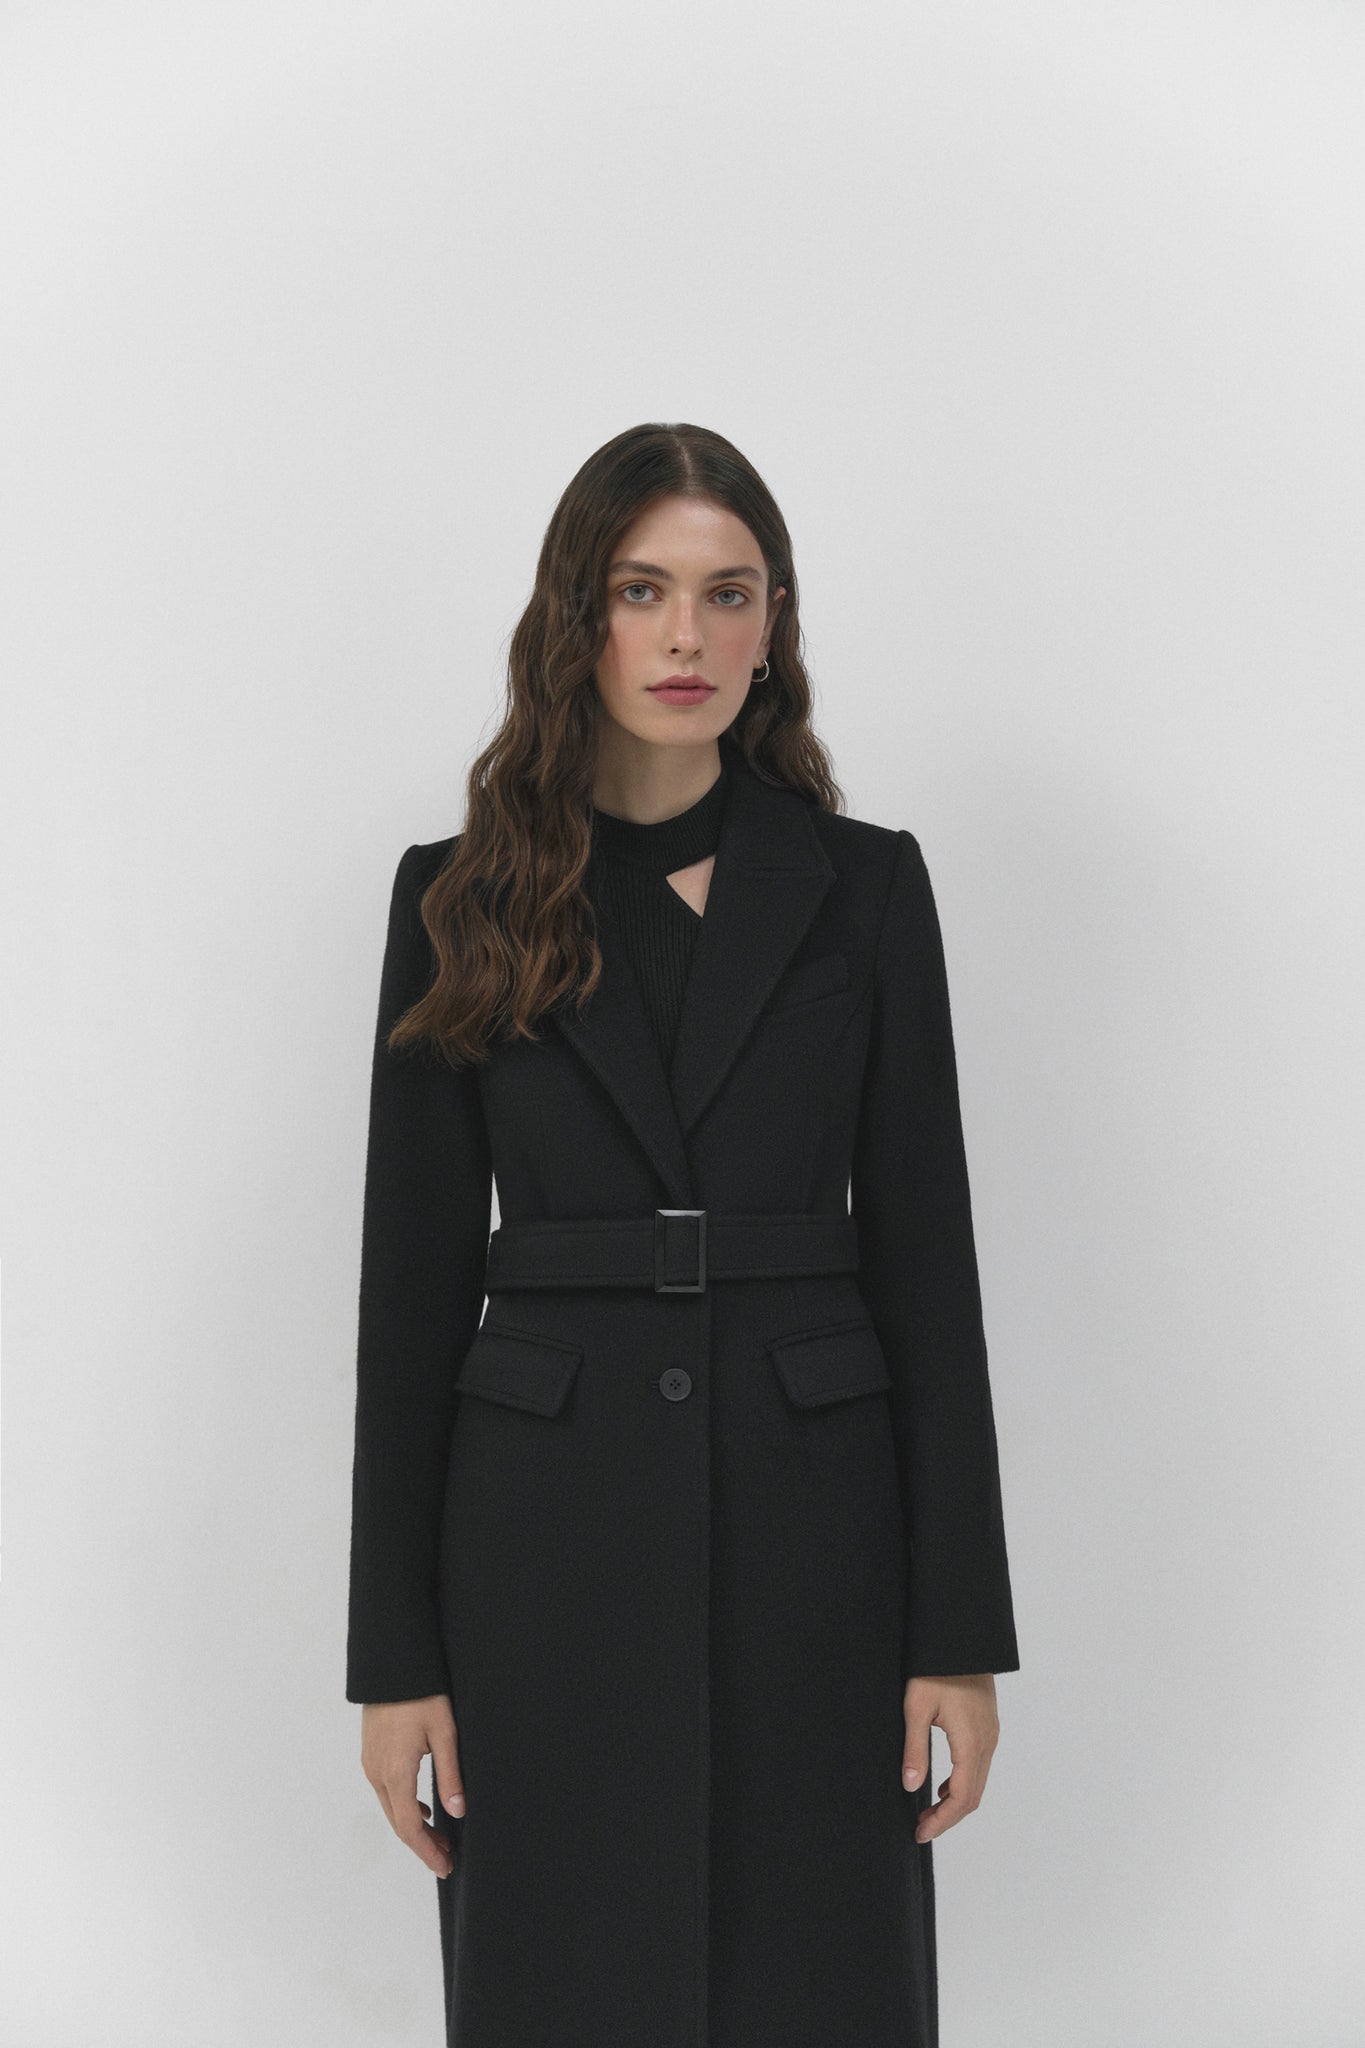 Tapered Black Wool Coat in Maxi Length with Waist-Fitted Silhouette photo 3